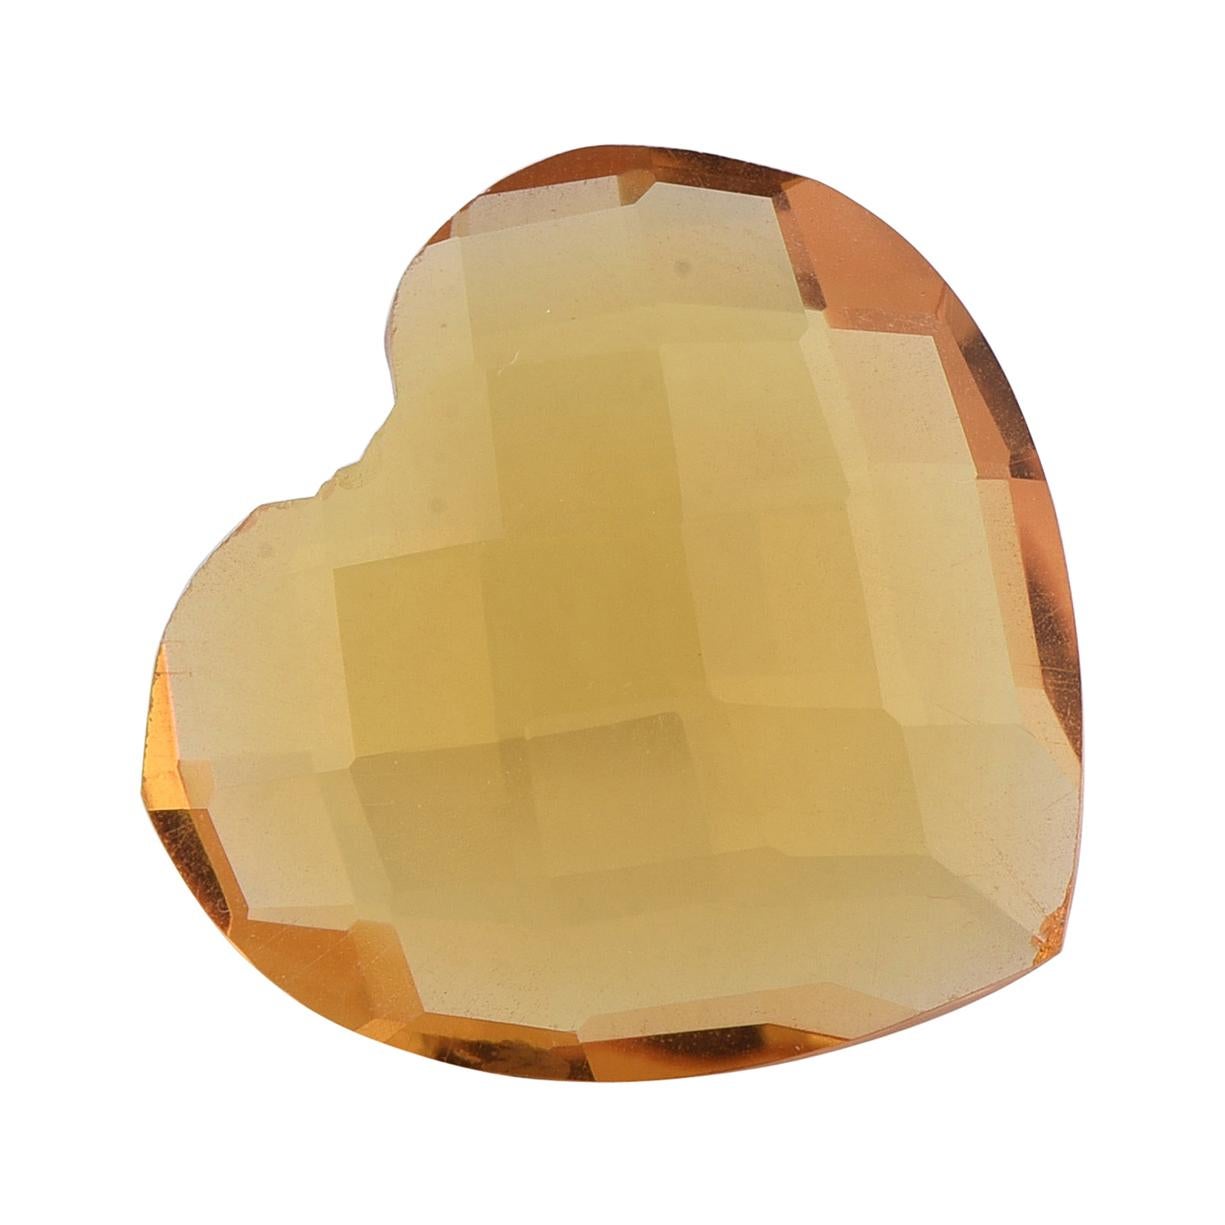 TJD Loose Yellow Natural Citrine 7.29 Ct Heart Shape Gemstone for Any Jewellery